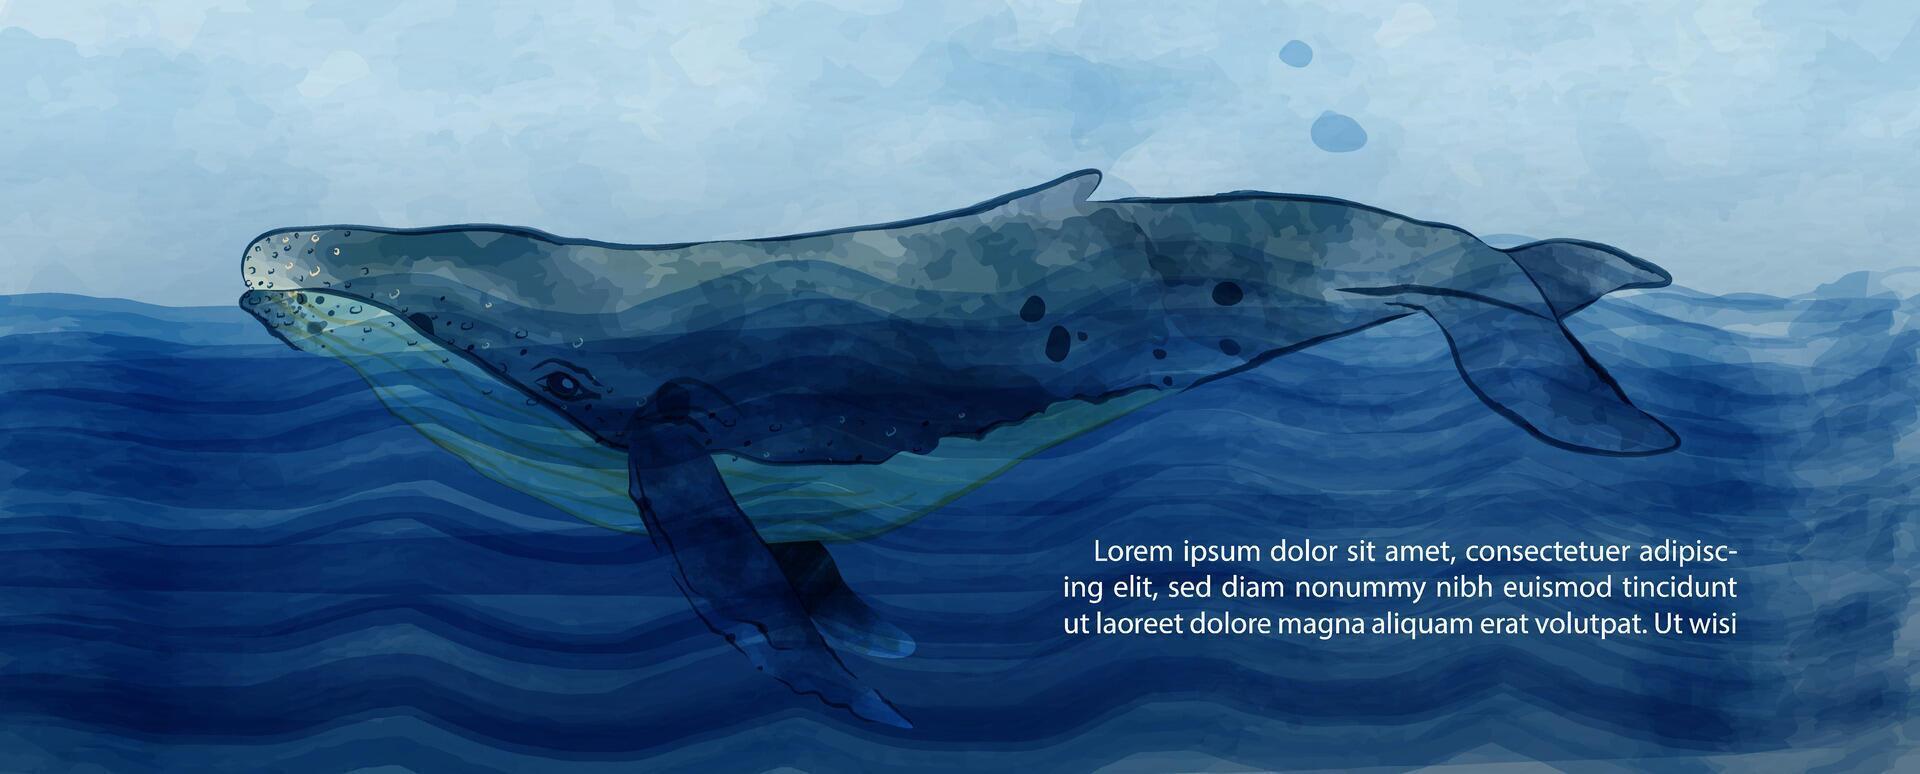 Whale swimming in the ocean in watercolors style and example texts on blue paper pattern background. vector